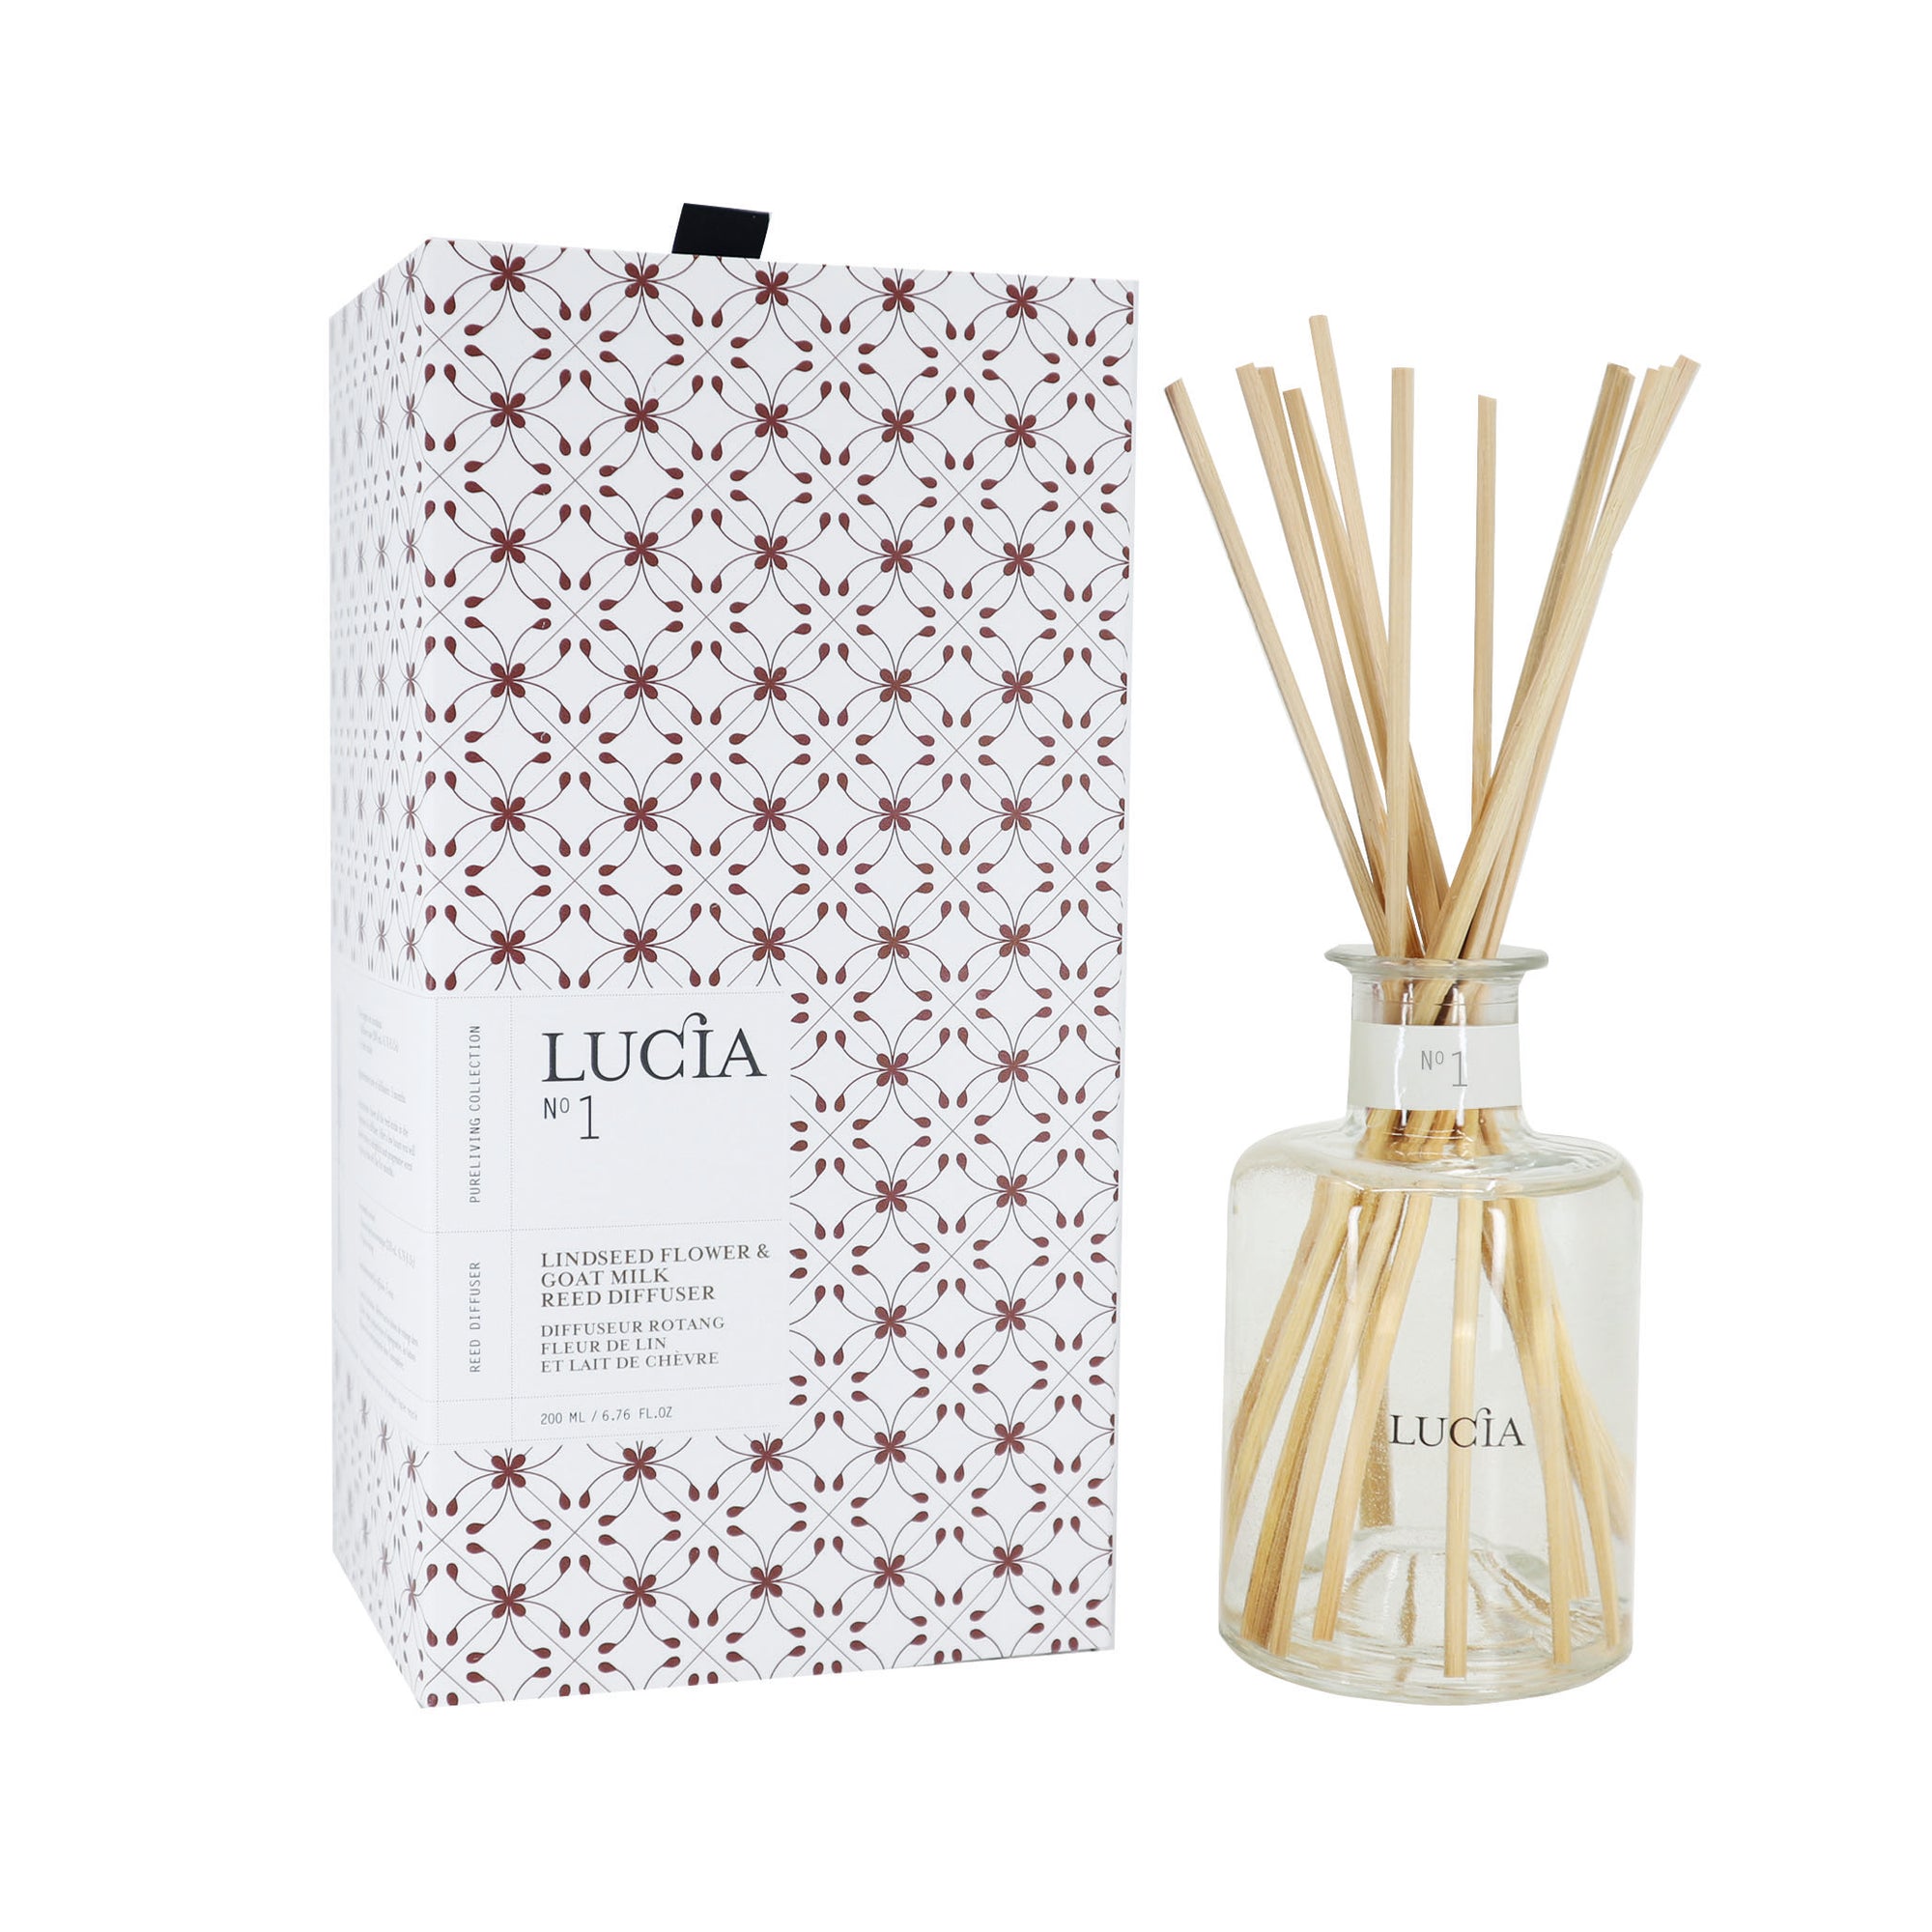 No.1 Linseed Flower & Goat Milk Lucia Reed Diffuser